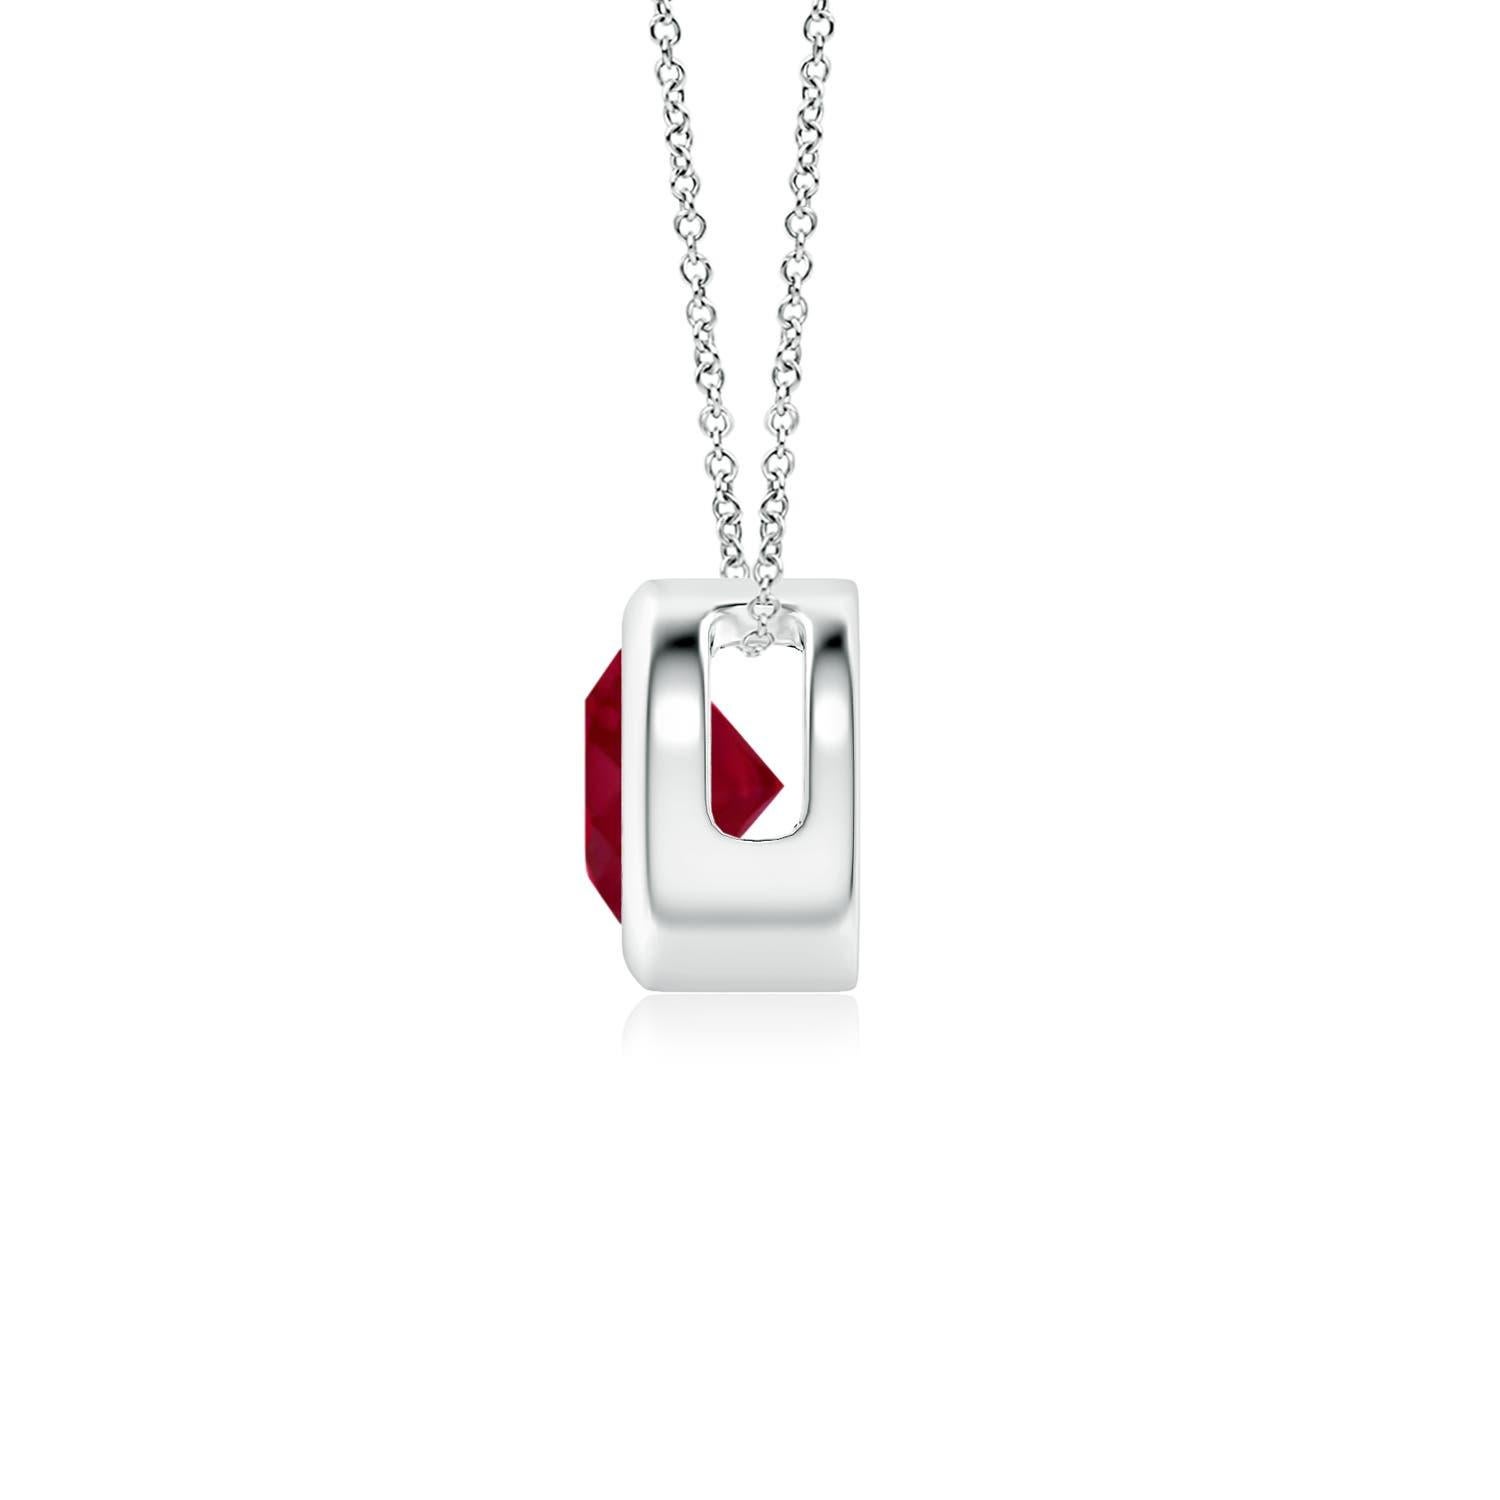 This classic solitaire ruby pendant's beautiful design makes the centre stone appear like it's floating on the chain. The purplish red gem is secured in a bezel setting. Crafted in Platinum, this dazzling round ruby pendant is simple yet